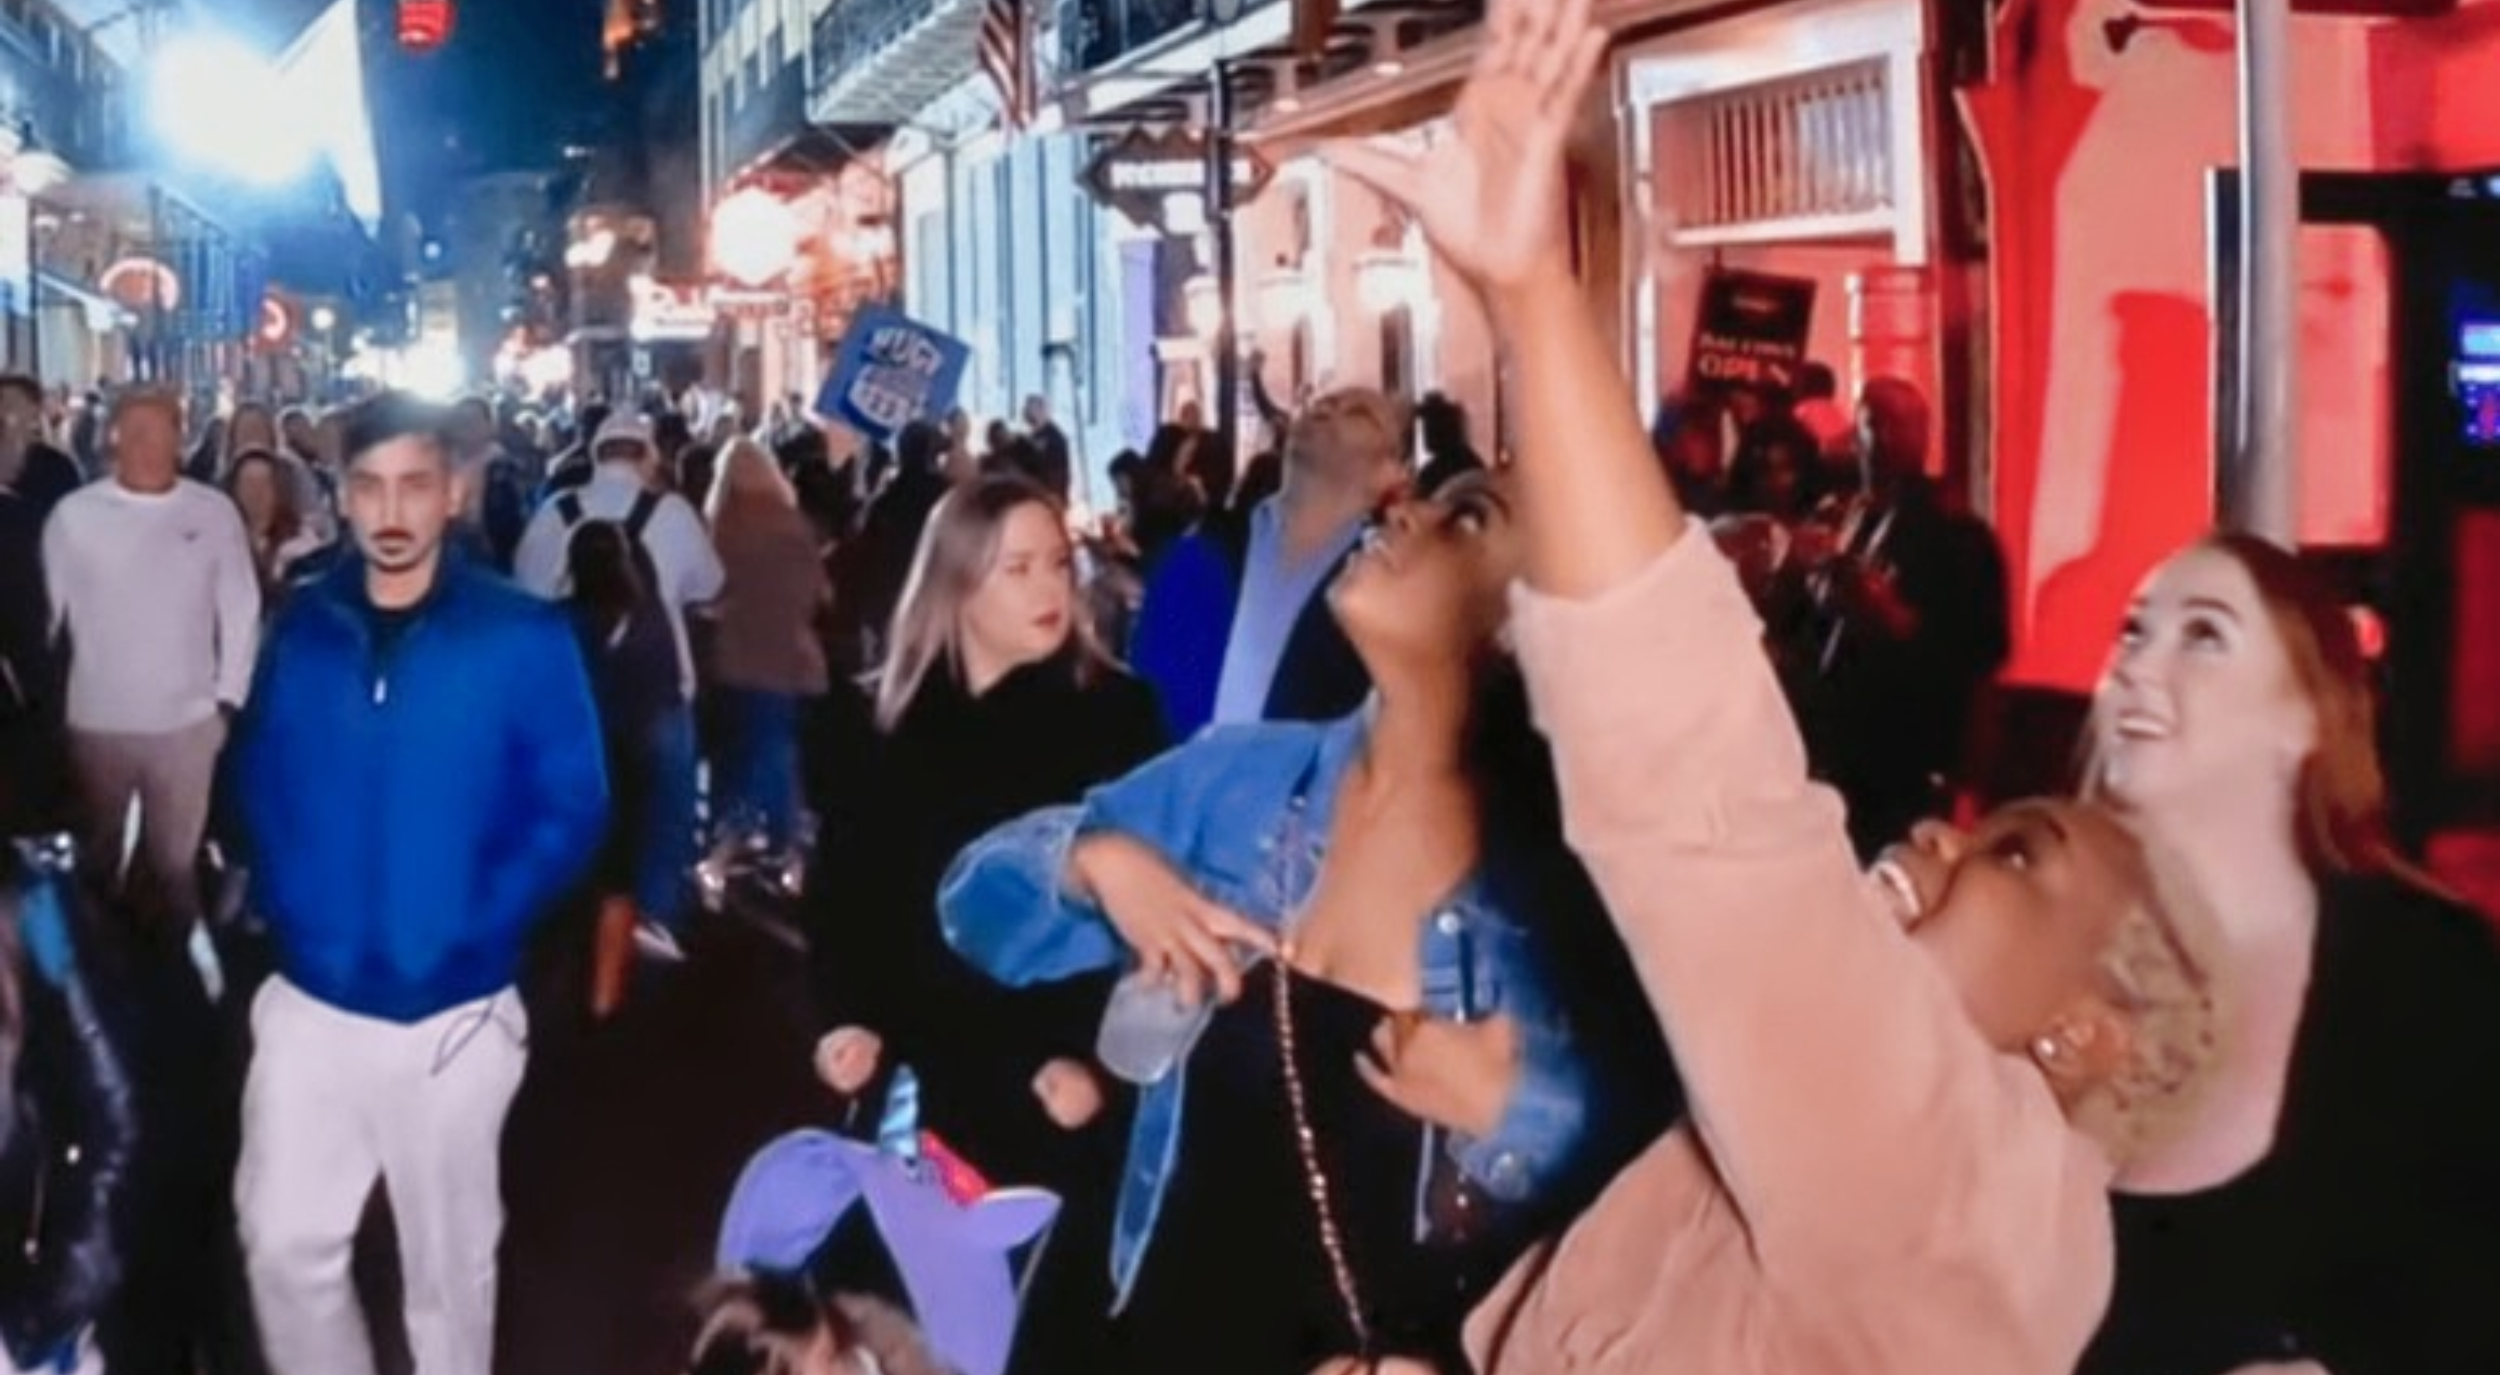 ESPN Releases Statement After Airing Woman Flashing Crowd For Beads On Bourbon Street During Live Su 